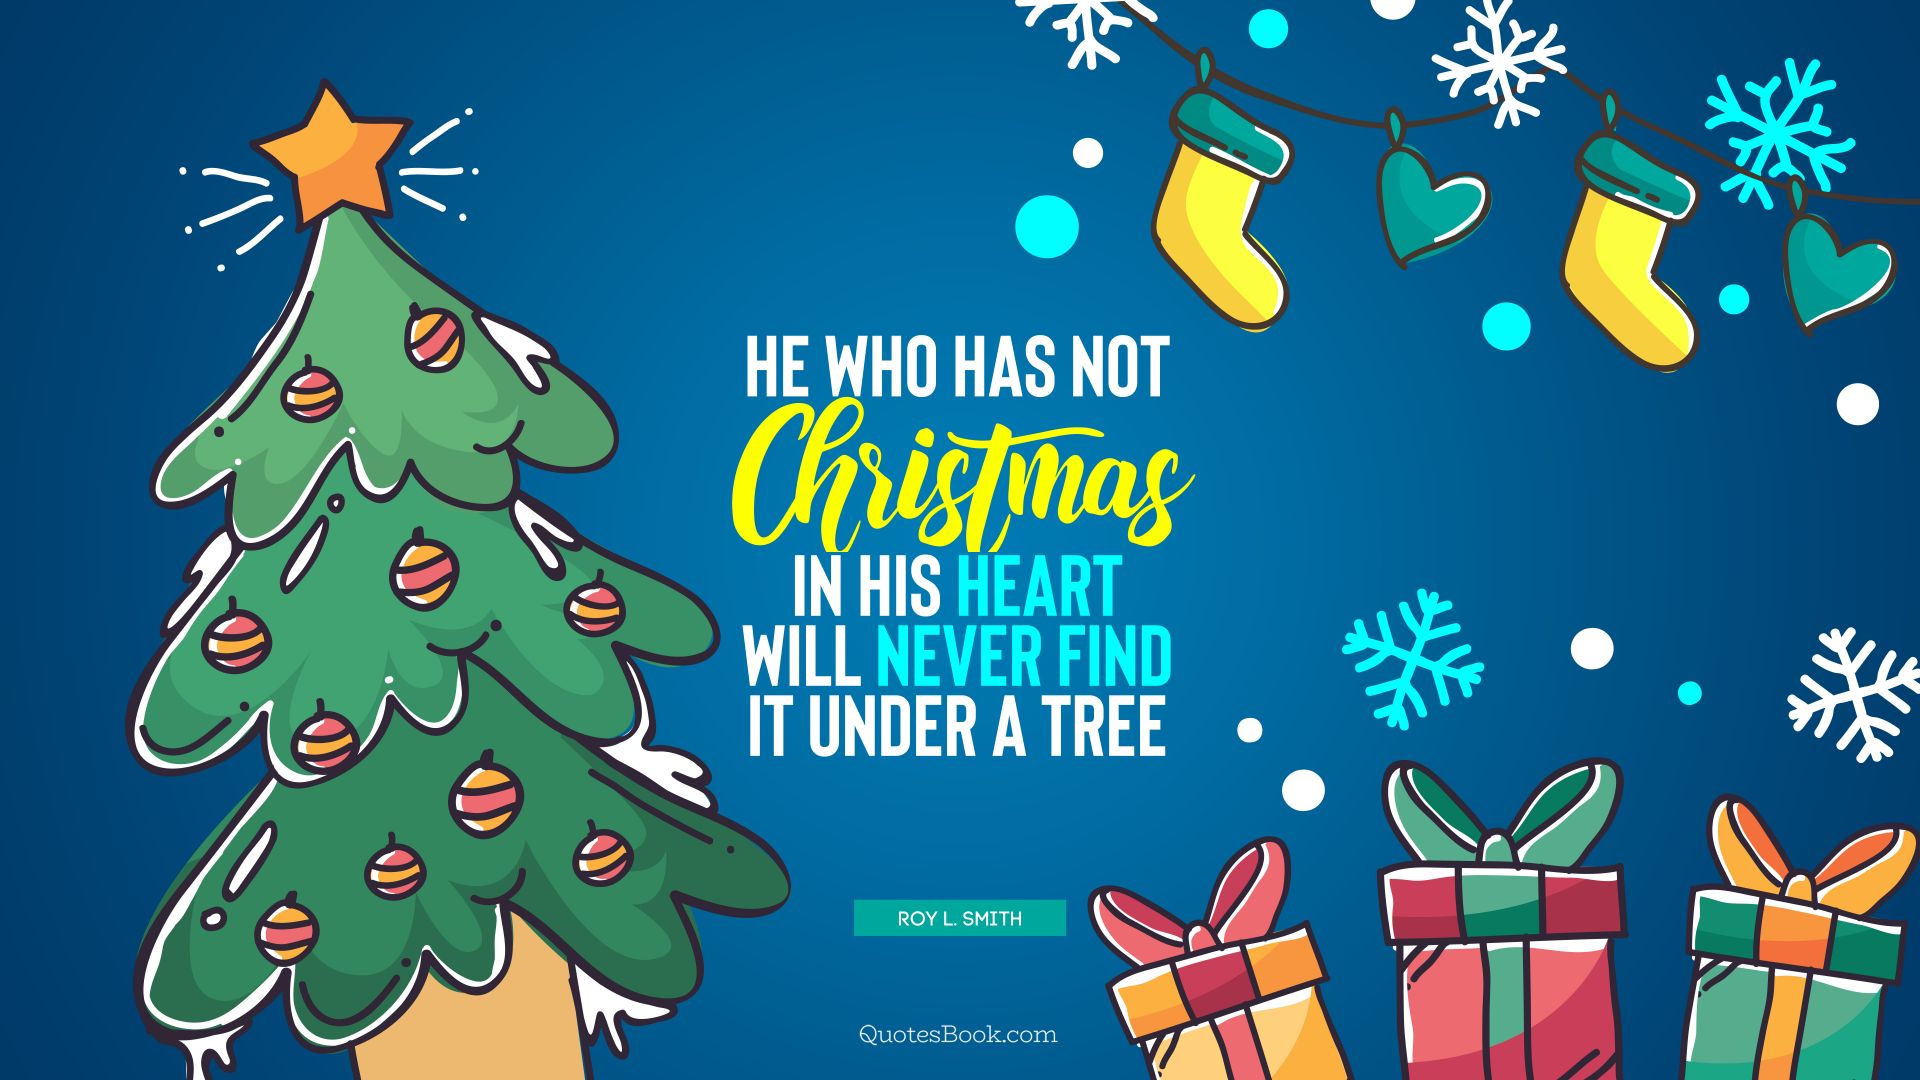 He who has not Christmas in his heart will never find it under a tree. - Quote by Roy L. Smith